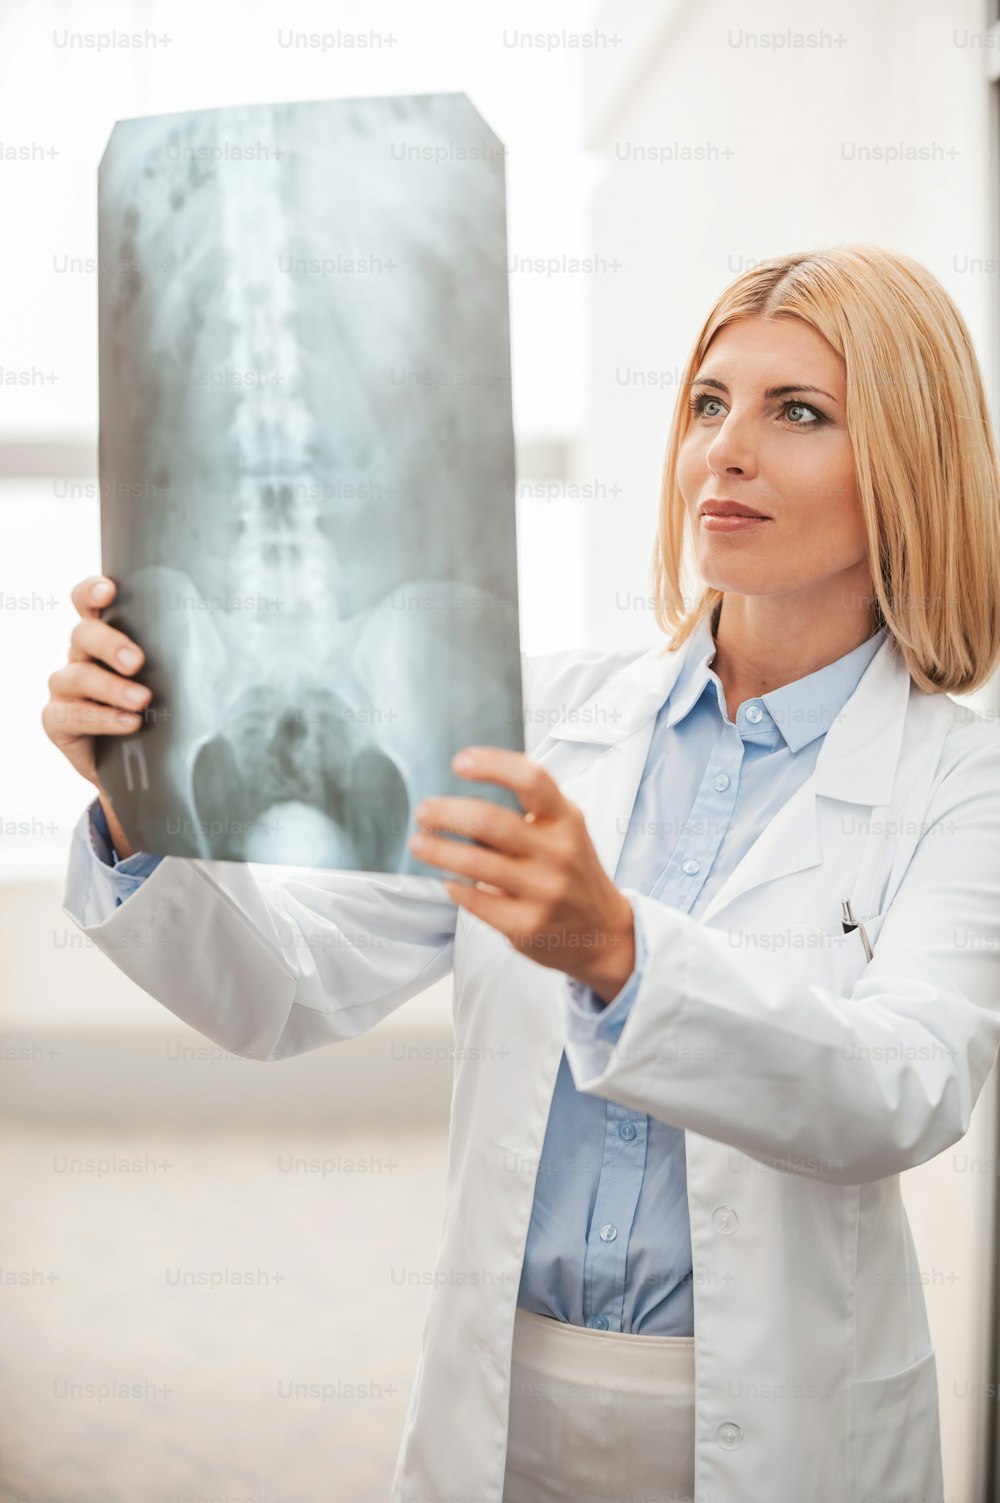 Doctor examining X-ray. Confident female doctor in white uniform holding x-ray image and looking at it